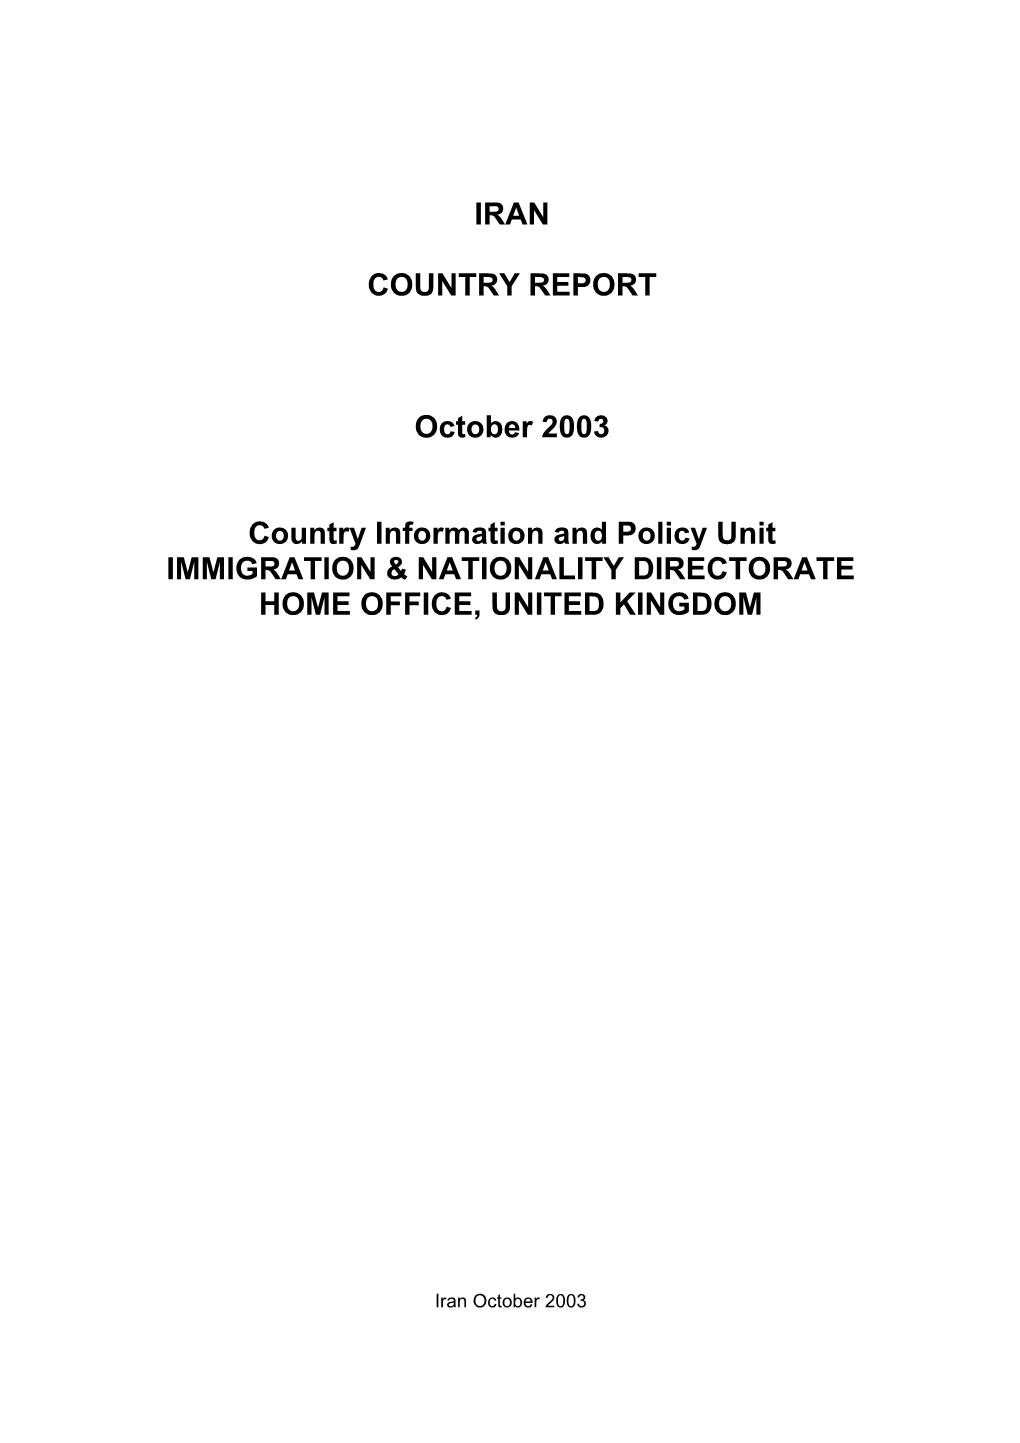 IRAN COUNTRY REPORT October 2003 Country Information And